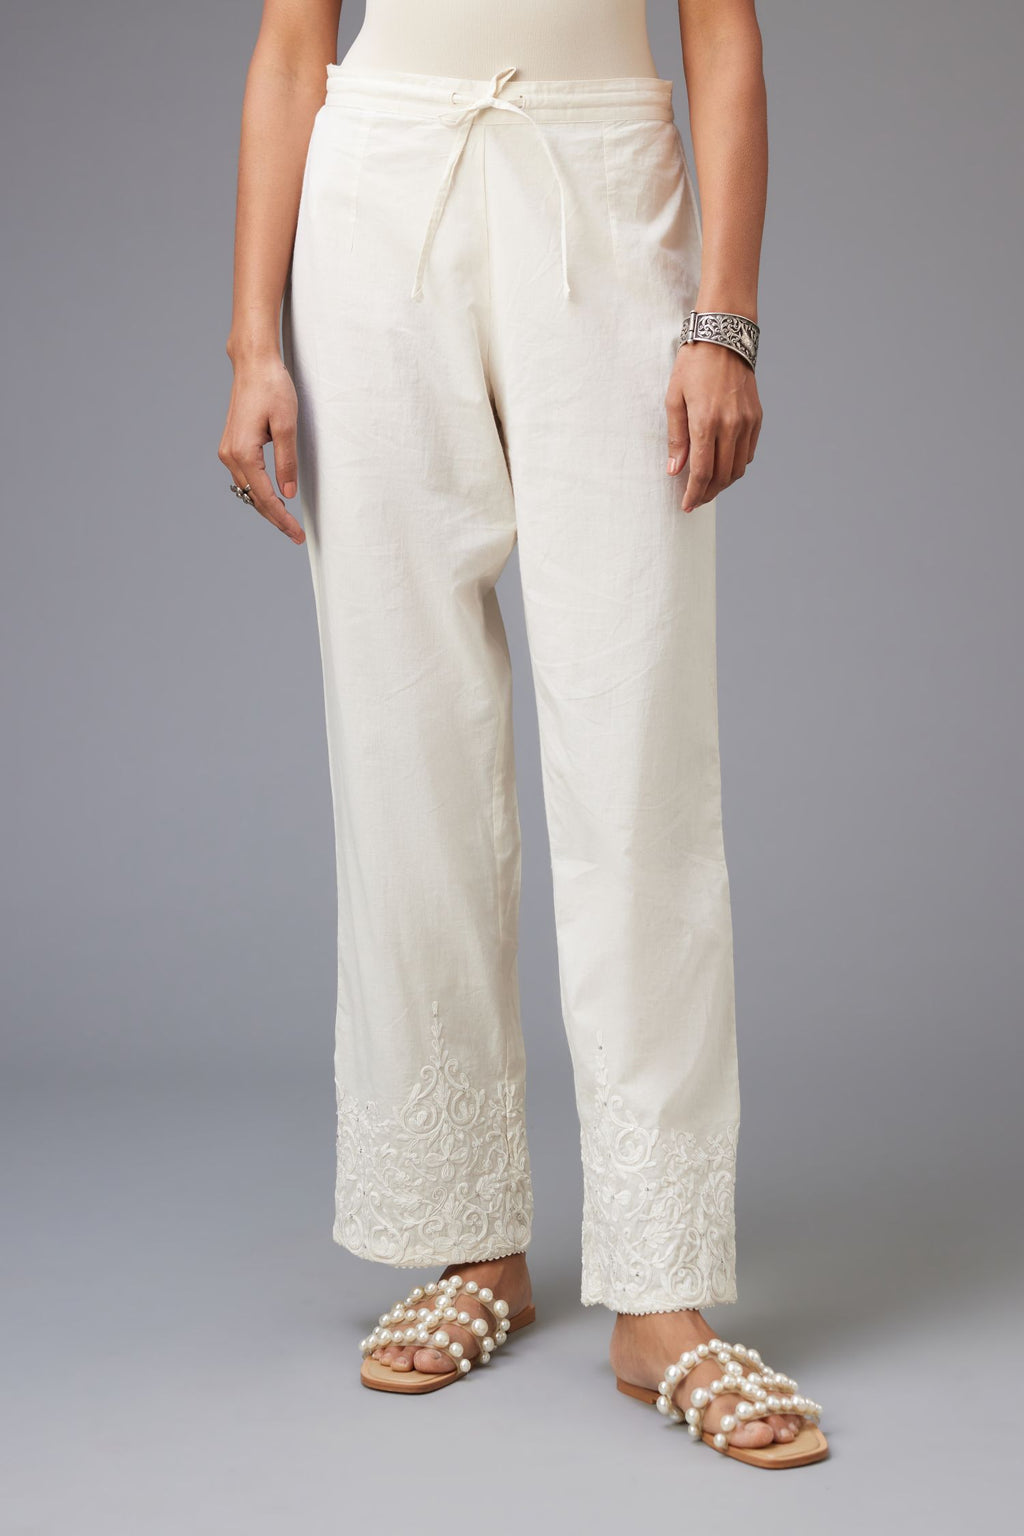 Buy OffWhite Pants for Women by AVAASA MIX N MATCH Online  Ajiocom